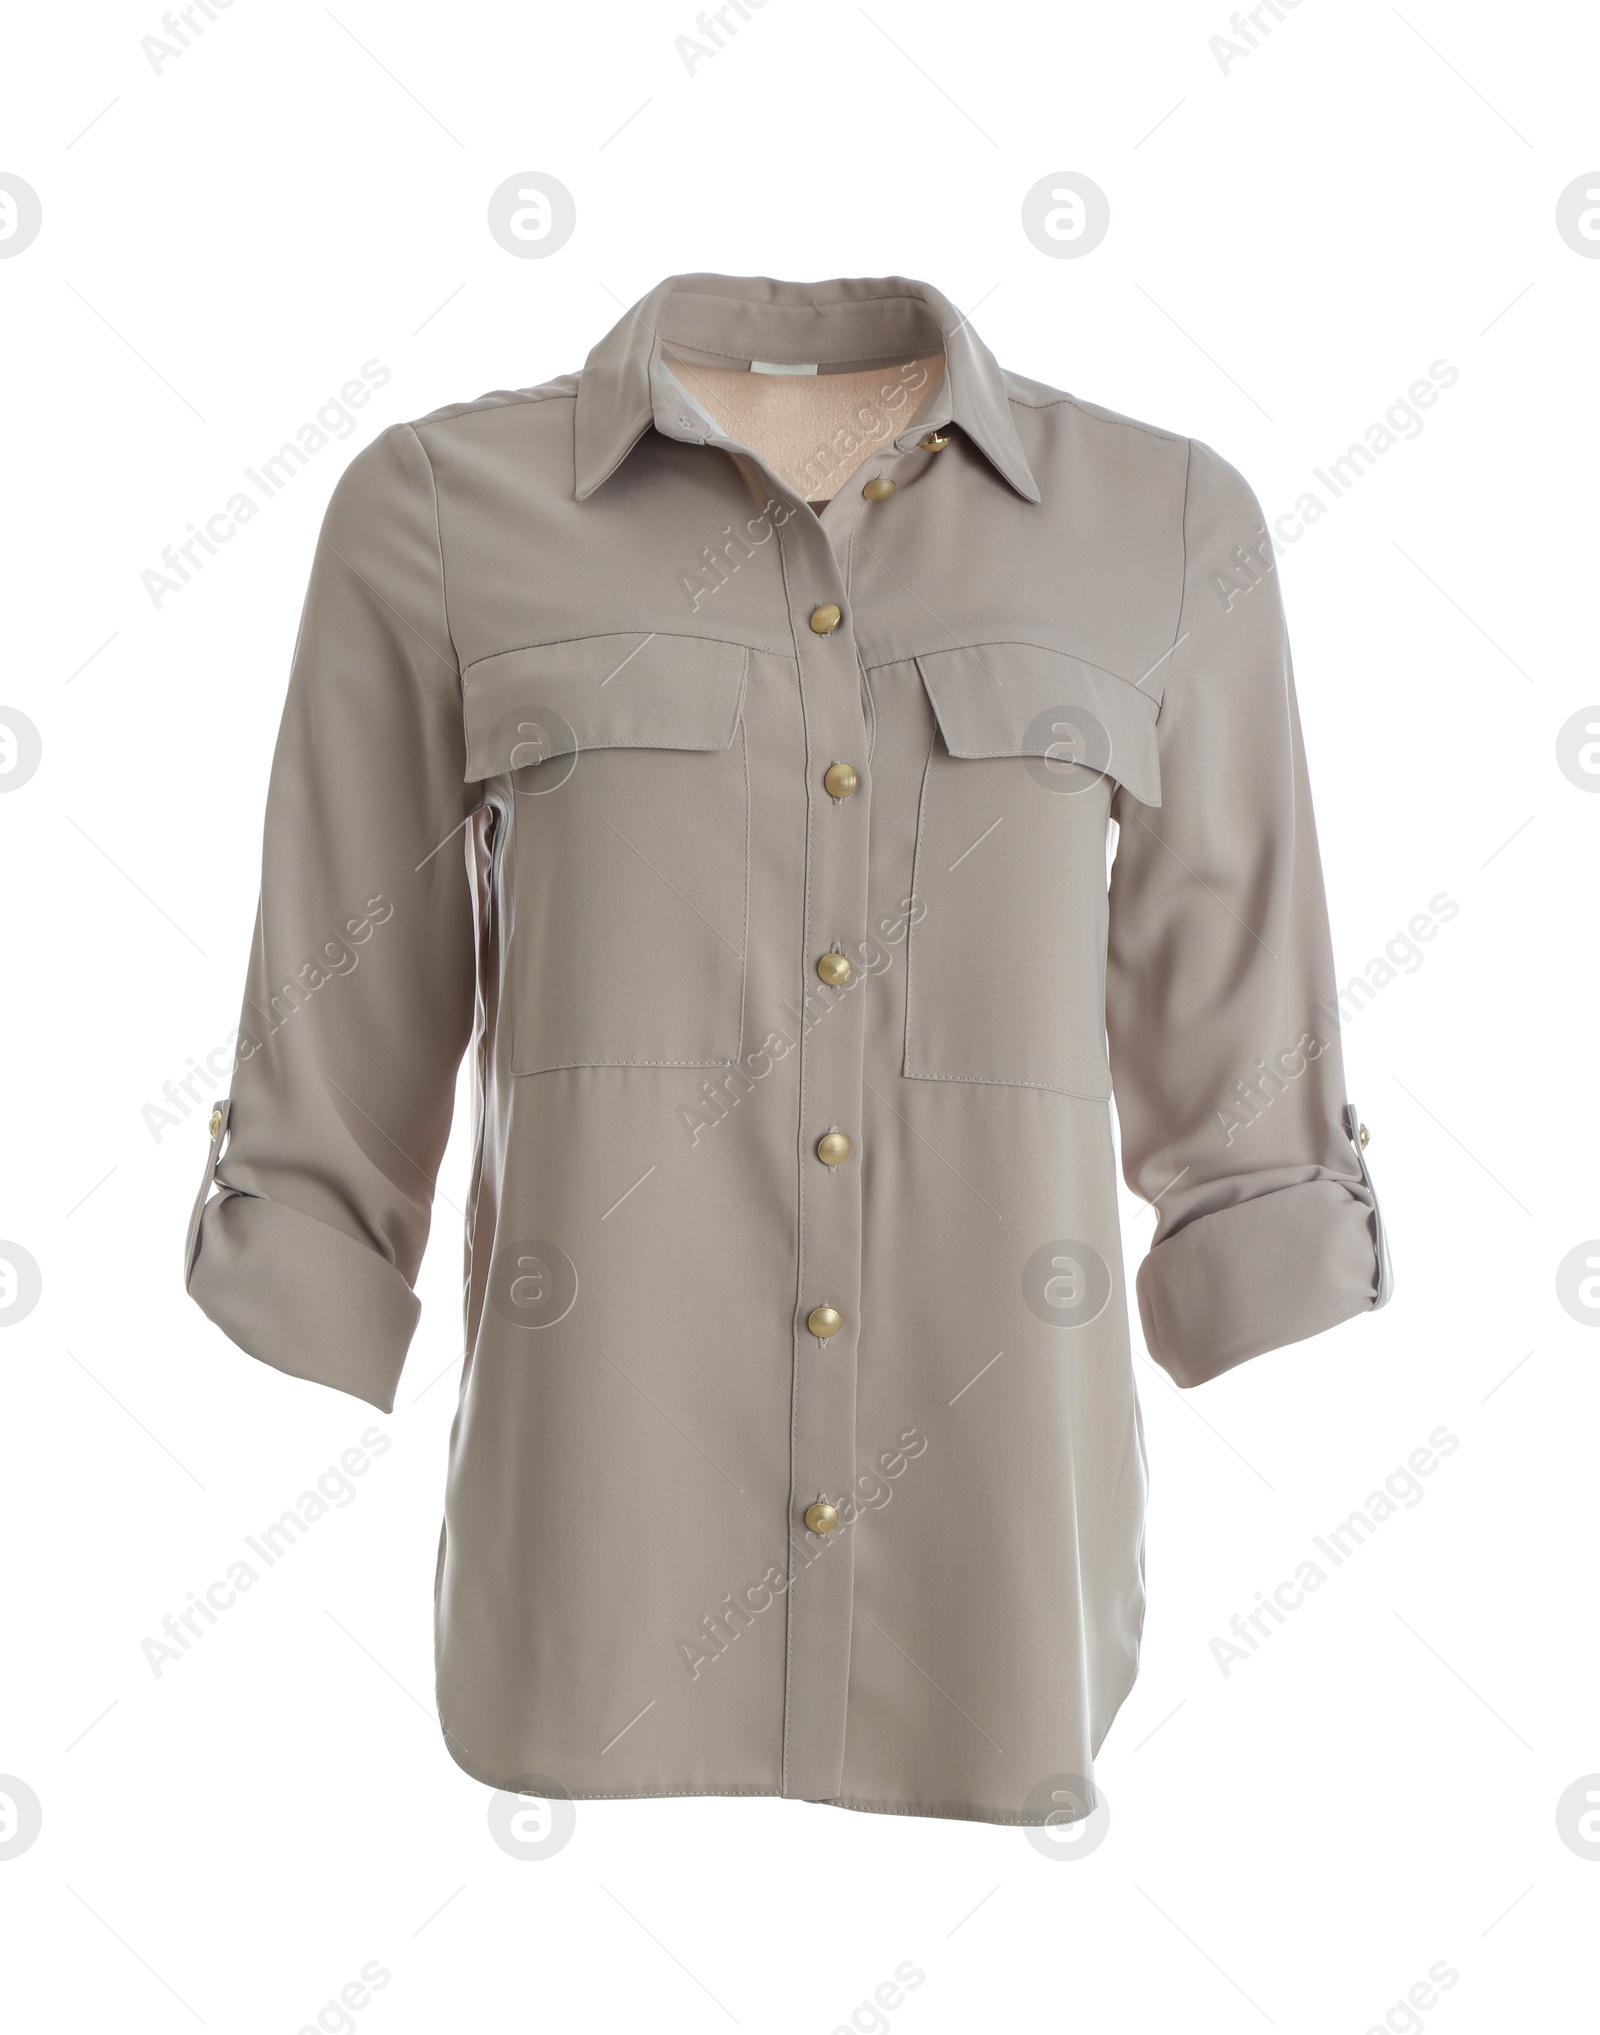 Photo of Elegant beige shirt on mannequin against white background. Women's clothes